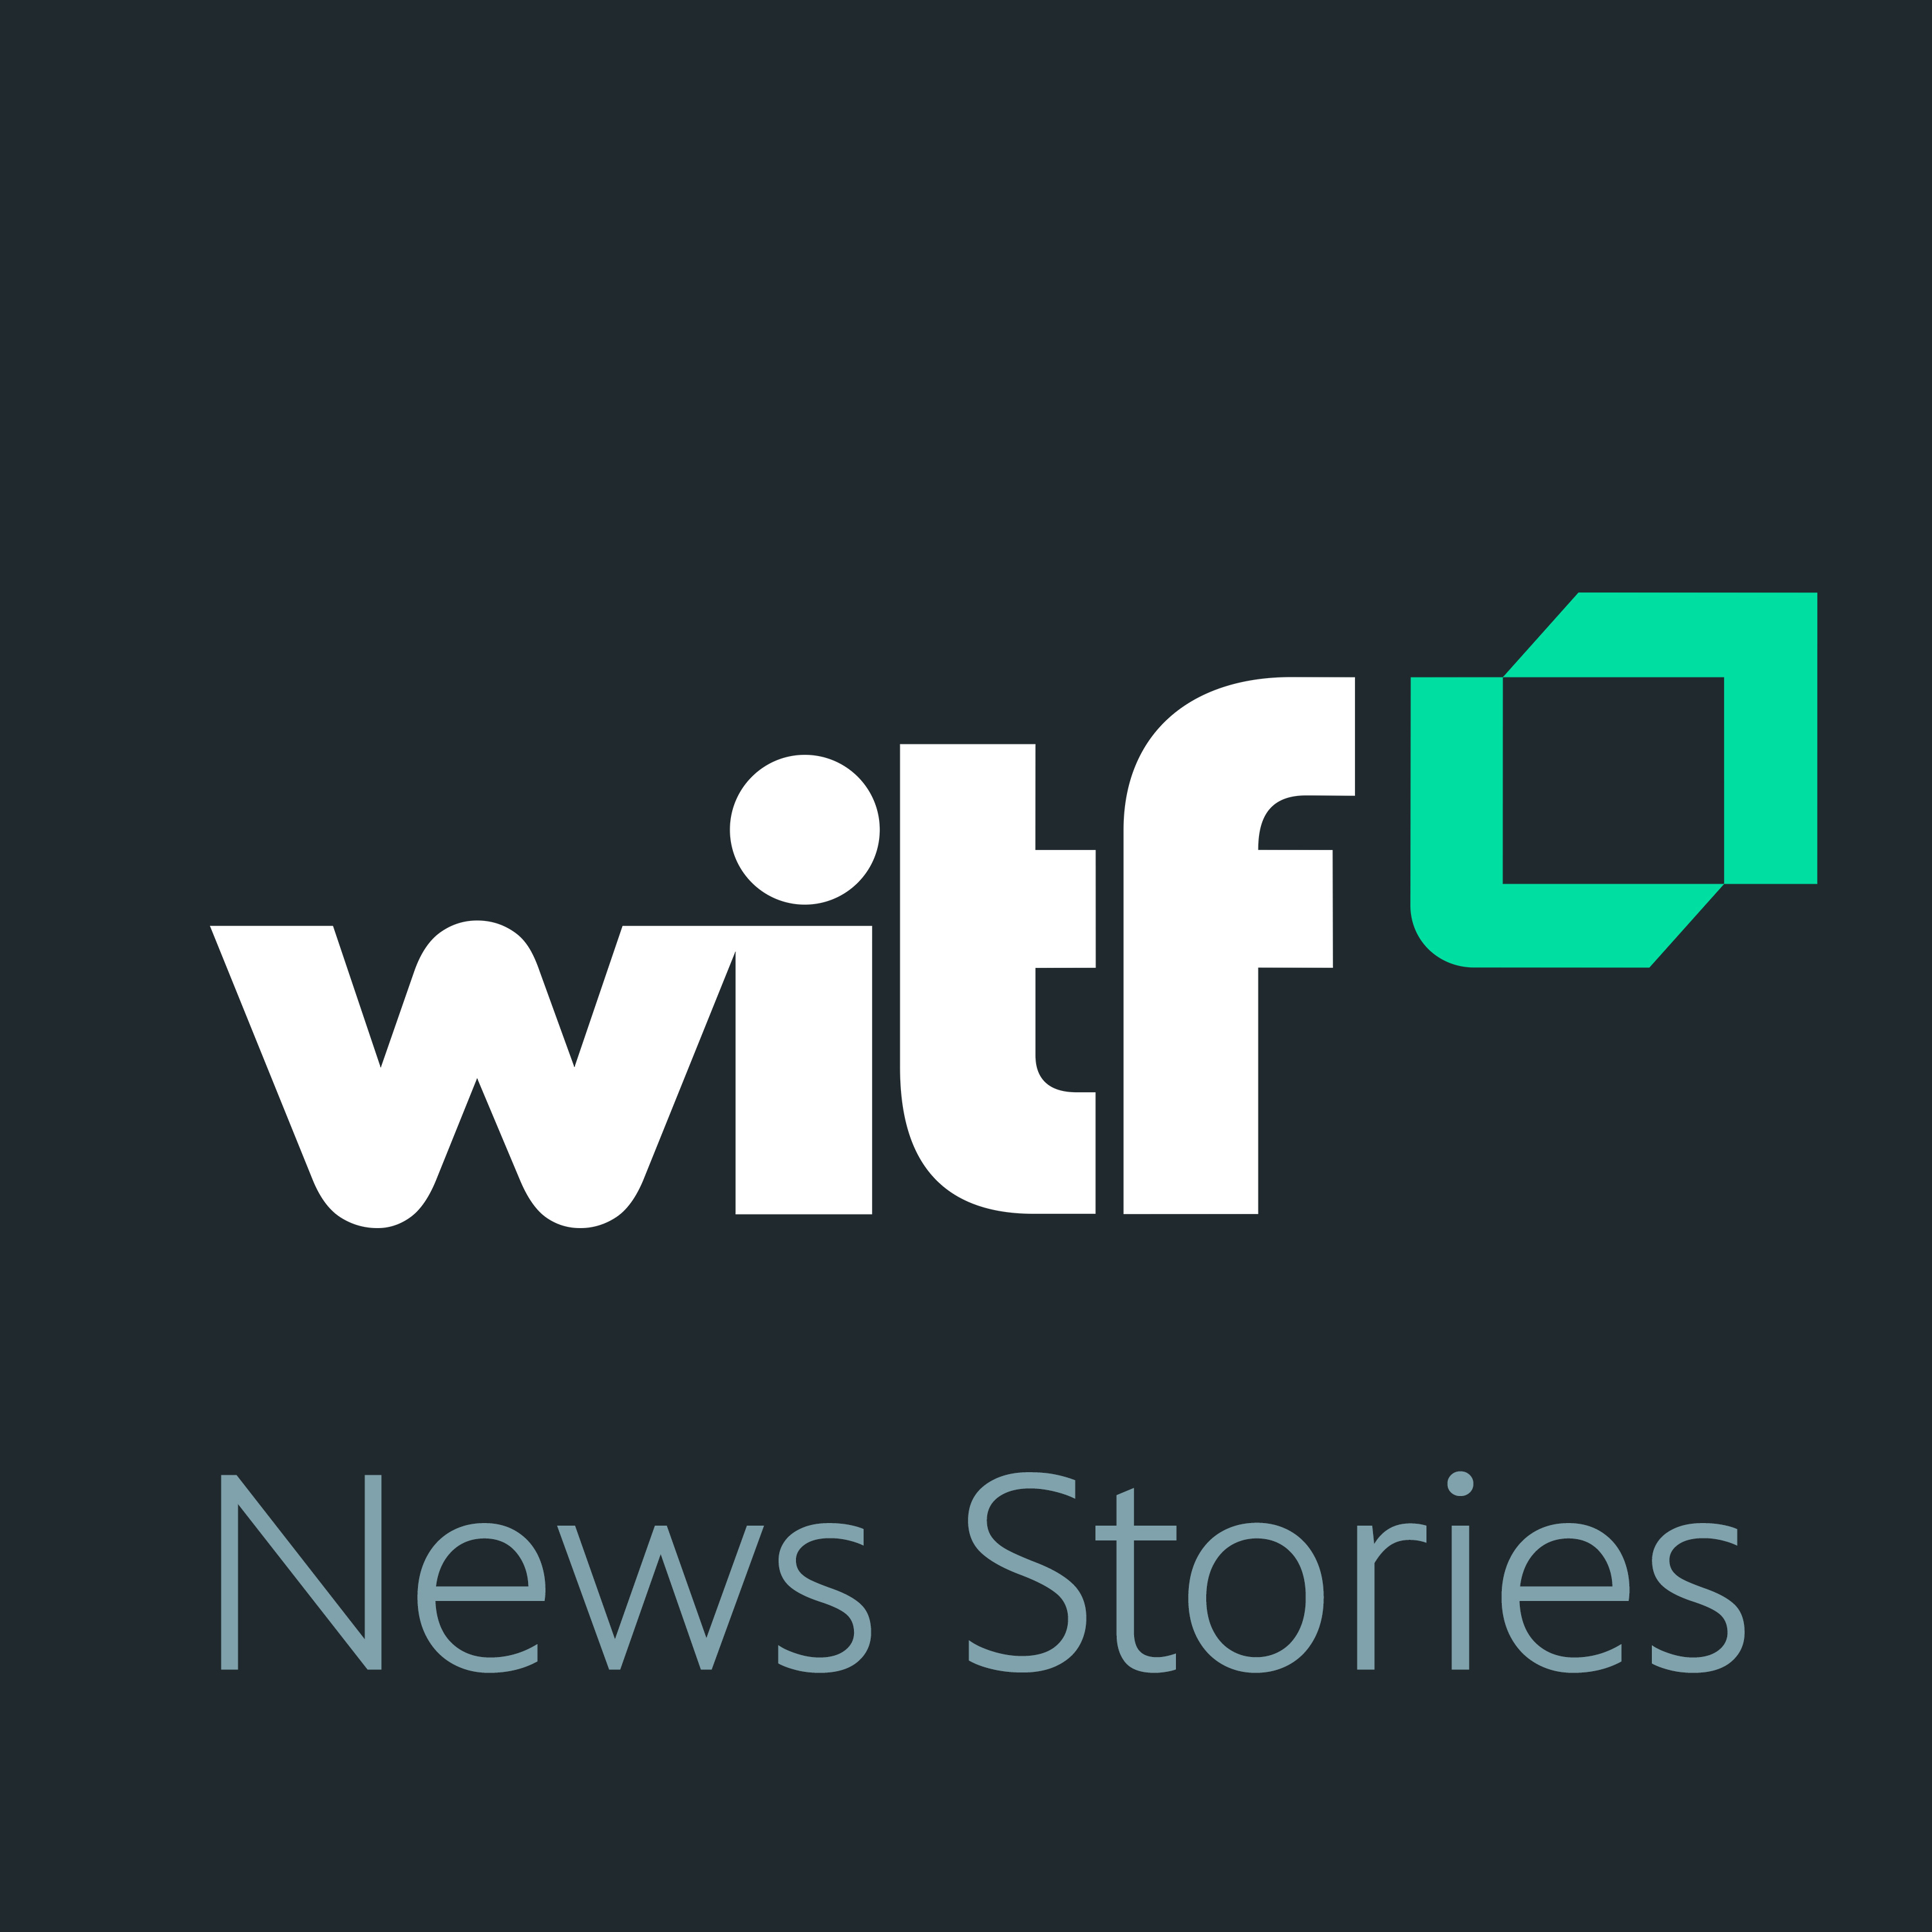 How WITF will cover stories from News & Brews